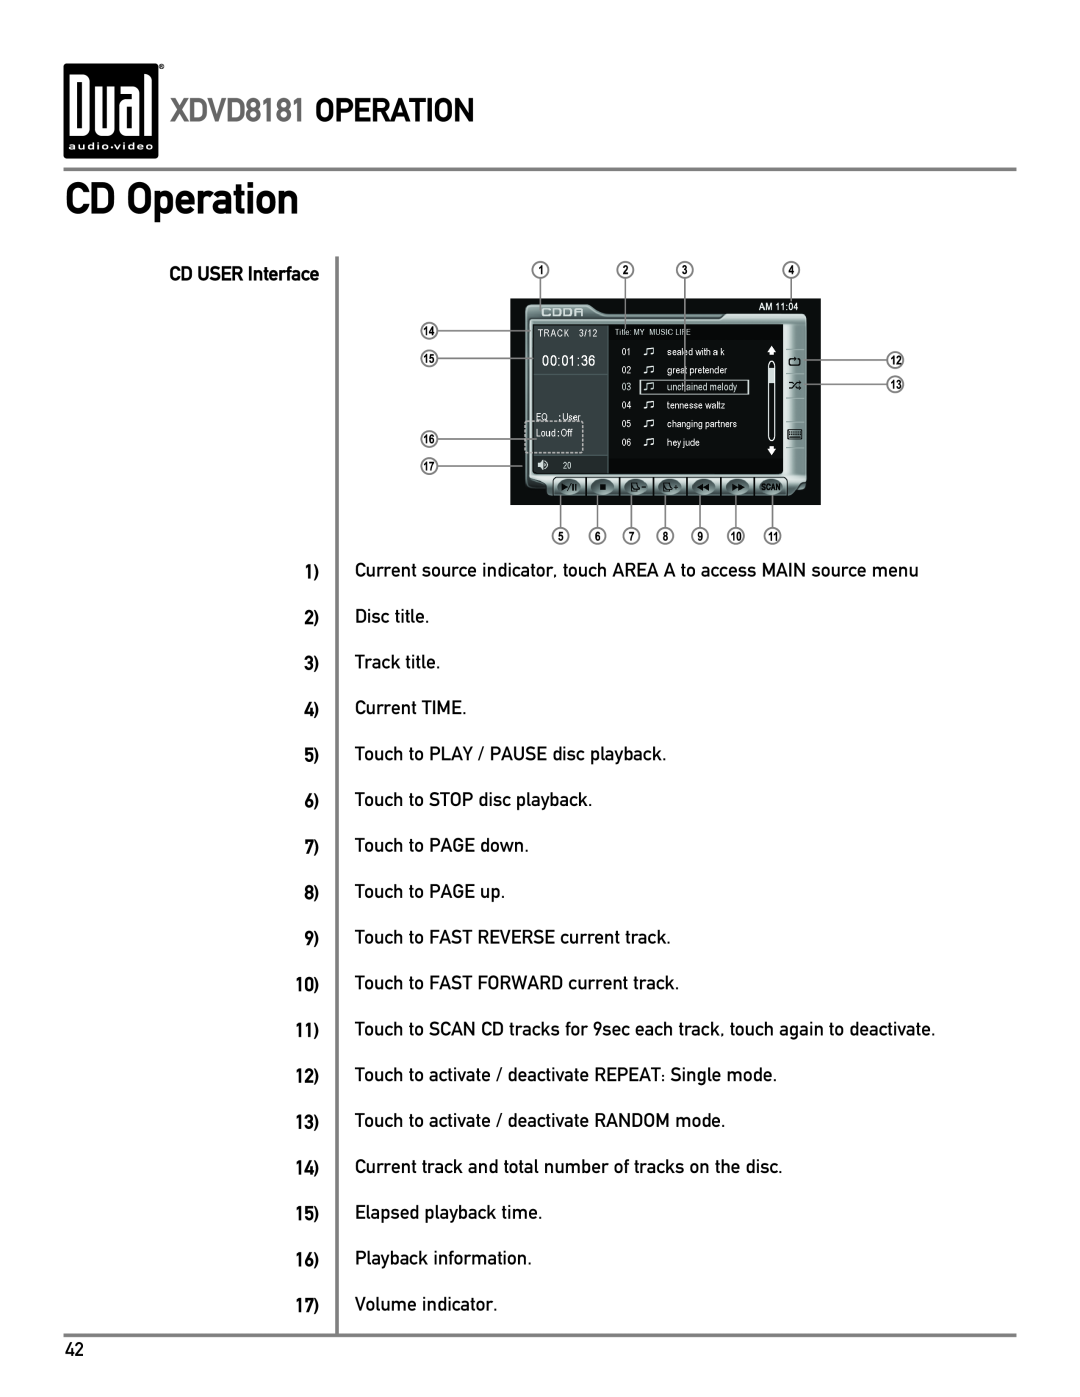 Dual owner manual CD Operation, XDVD8181 OPERATION, CD USER Interface 1 2 3 4 5 6 7 8 9 10 11 12 